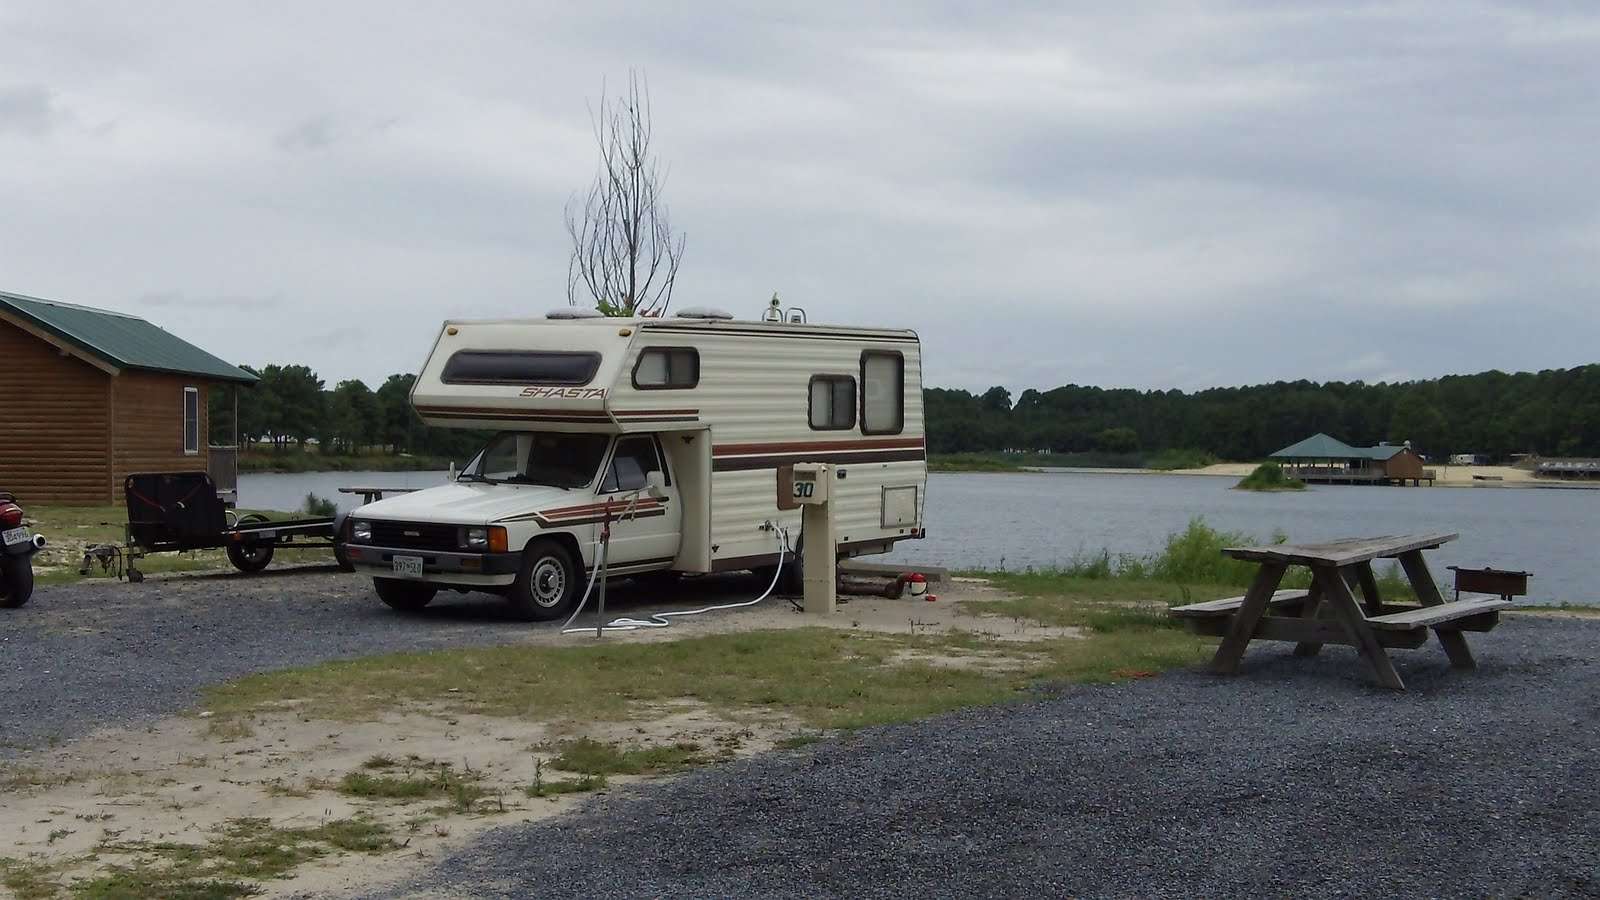 Tims Photo Blog: Water front camping in Ocean City Maryland